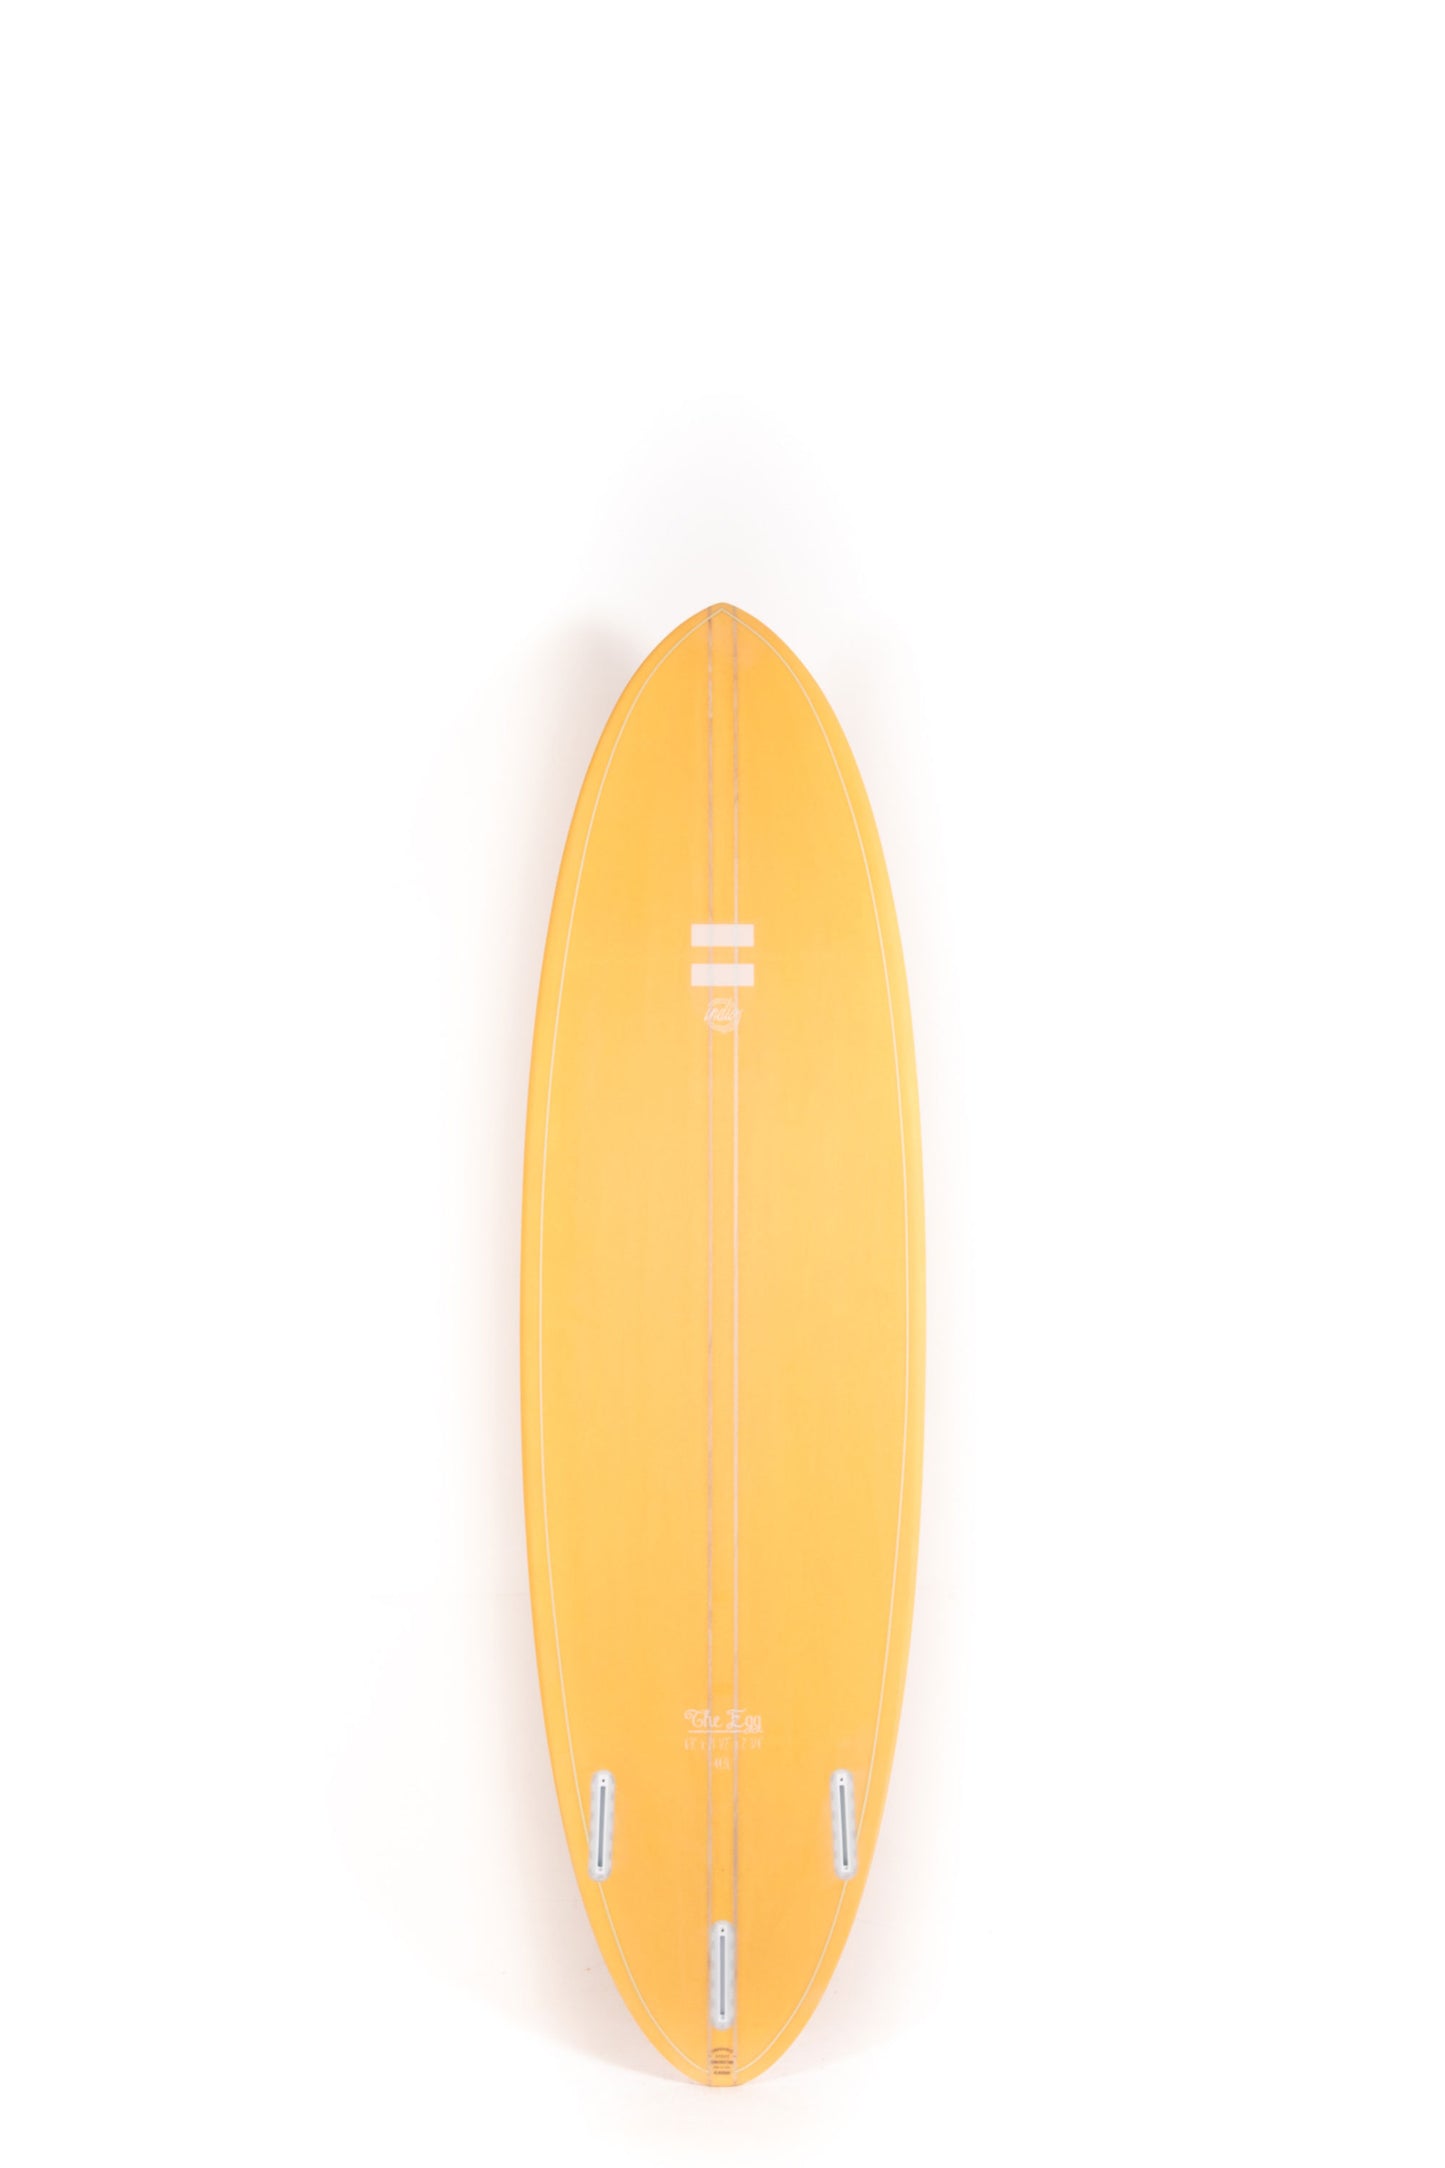 Pukas-Surf-Shop-Indio-Surfboards-The-Egg-6_8